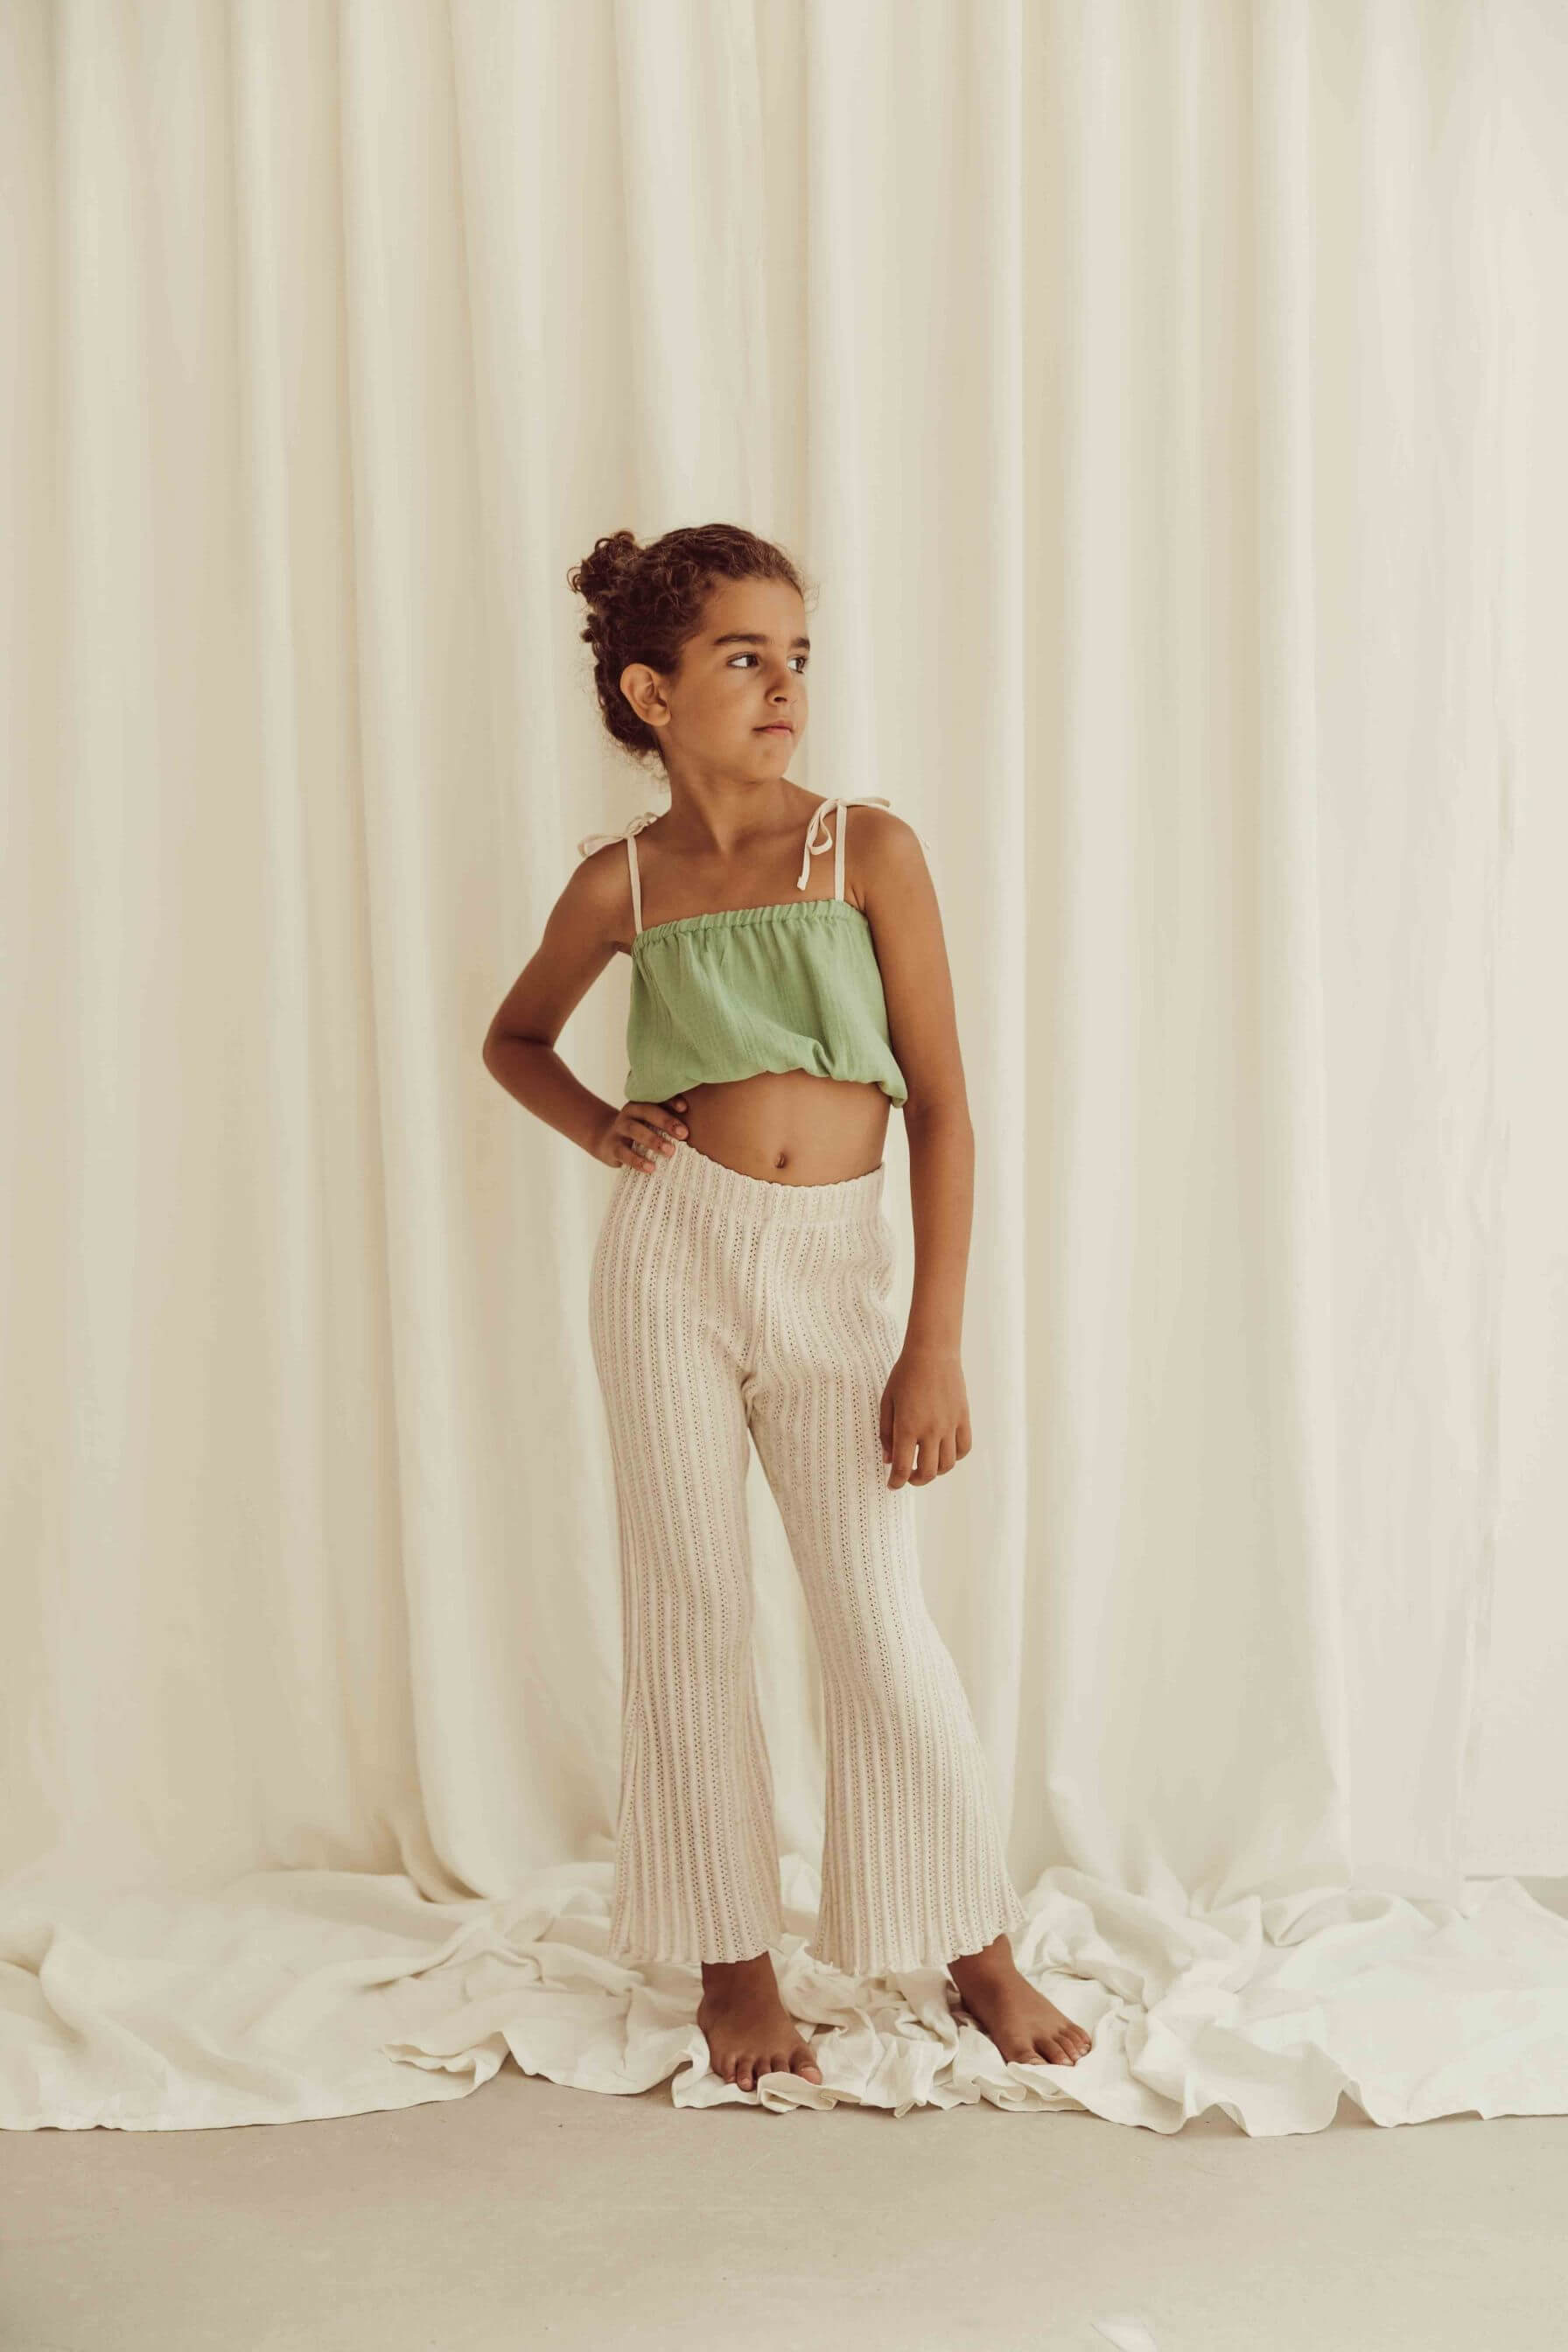 Shop organic cotton crop top for girls in green colour. This si also grow with you top with adjustable straps and an elastic top and bottom to ensure it will fit a few seasons. MiliMilu offers kids, baby and teen clothing online in Hong Kong and Singapore. The best selection of organic cotton kids clothing online.